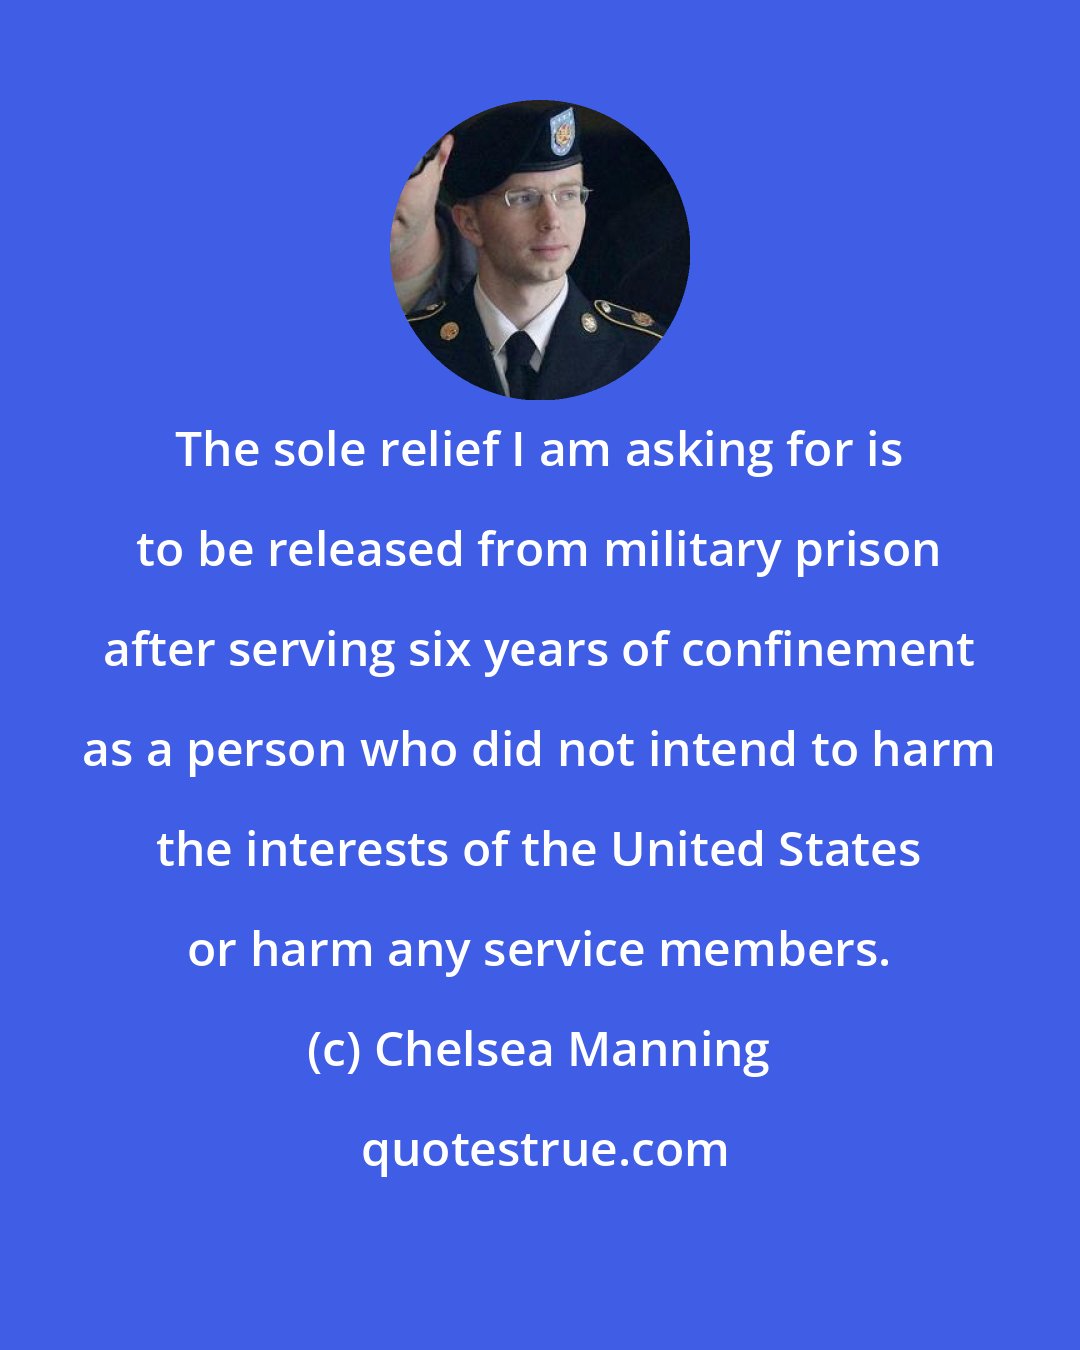 Chelsea Manning: The sole relief I am asking for is to be released from military prison after serving six years of confinement as a person who did not intend to harm the interests of the United States or harm any service members.